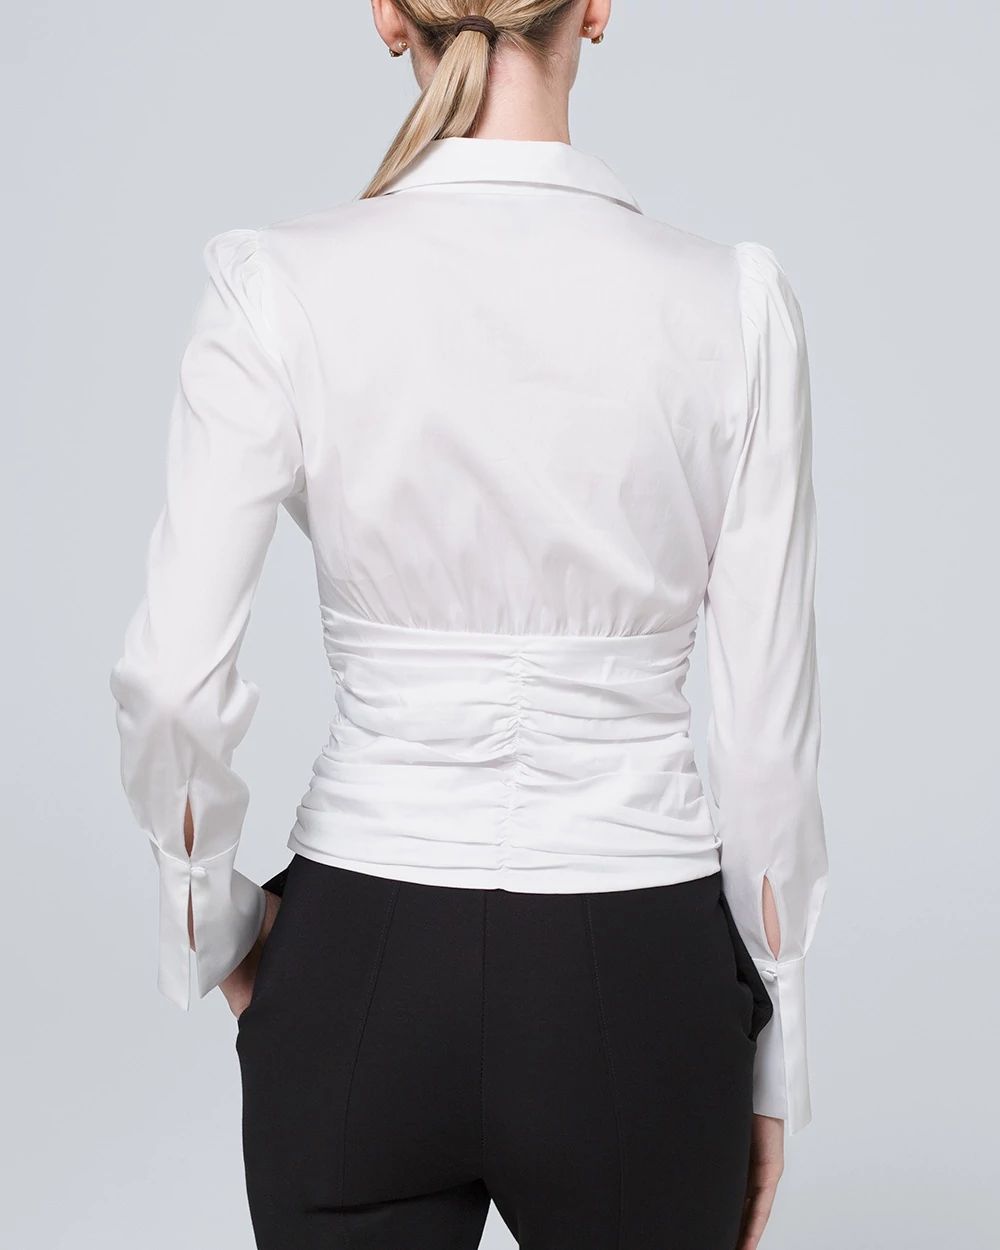 35th Anniversary Ruched-Waist Shirt click to view larger image.